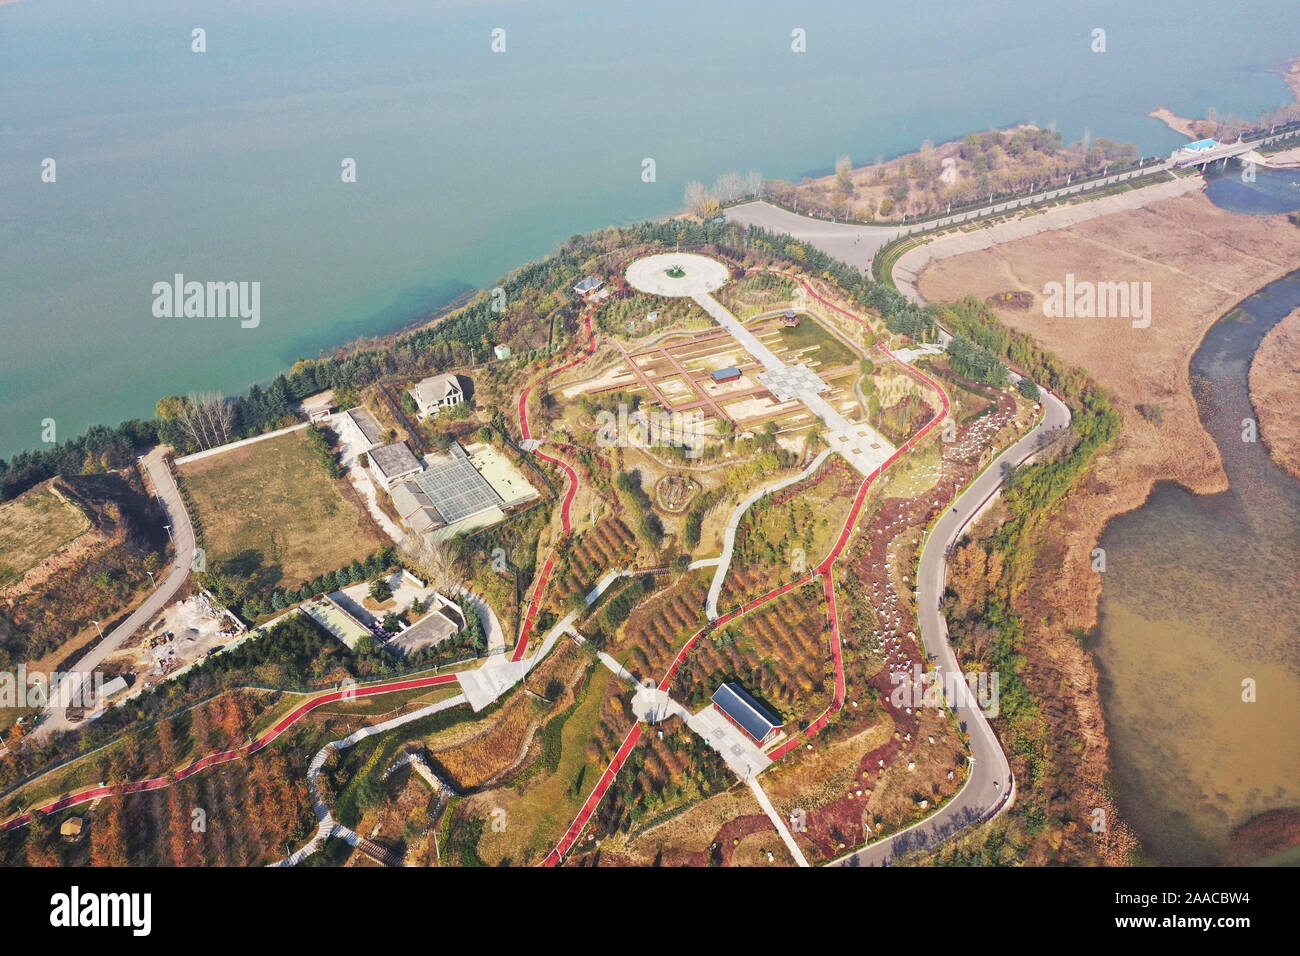 Henan, Henan, China. 21st Nov, 2019. Henan, CHINA-Overlooking the Yellow River wetland nature reserve in Sanmenxia, central China's Henan province, Nov. 21, 2019.Sanmenxia wetland is a national wetland nature reserve. It is the habitat of national rare birds such as white swans and cranes. It is also the largest wetland nature reserve in Henan province. Credit: SIPA Asia/ZUMA Wire/Alamy Live News Stock Photo